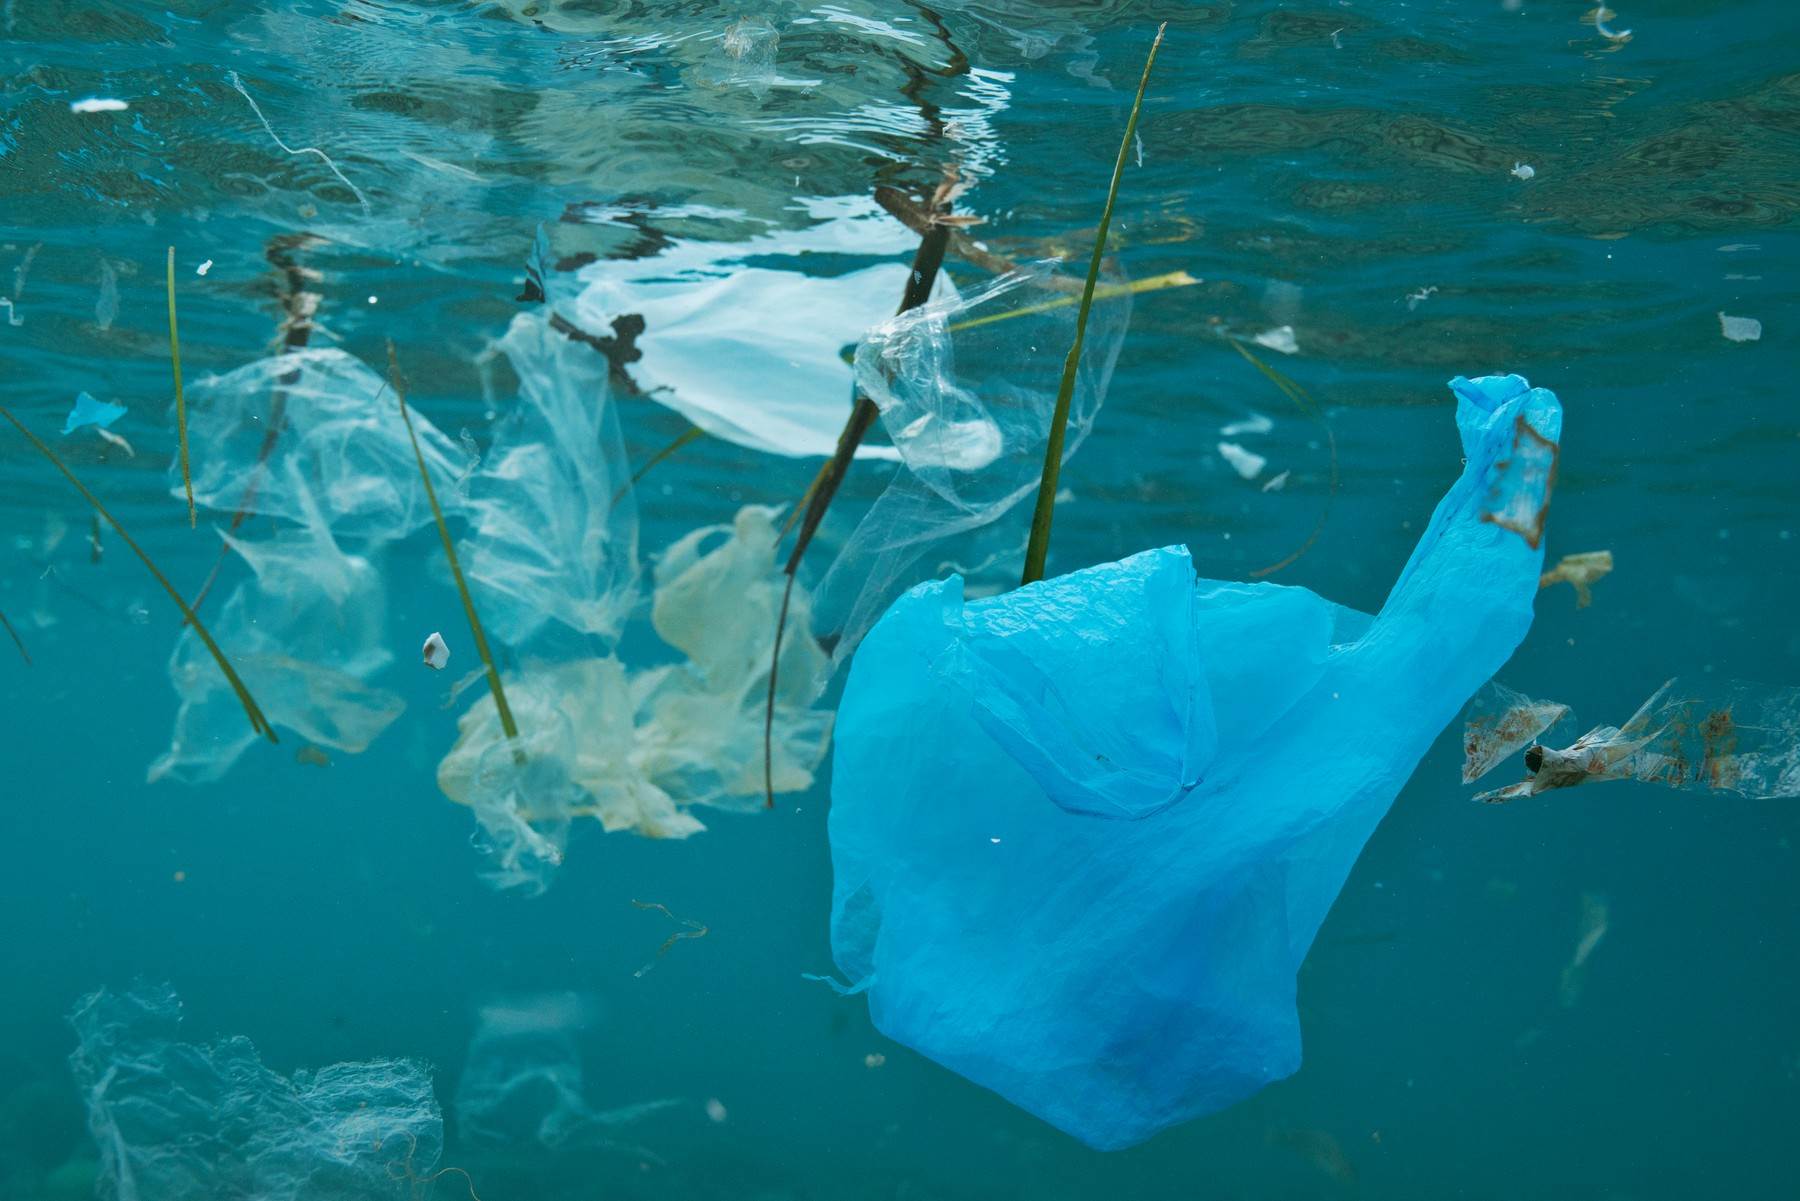  BIOLOGICAL;ECOLOGICAL;ECOSYSTEM;ENVIRONMENT;ENVIRONMENTAL IMPACT;EUROPEAN;NATURE;NO-ONE;NOBODY;PLASTIC;PLASTICS;POLLUTED;POLLUTION;SPANISH;UNDER WATER;PLASTIC BAG;CARRIER BAG;WASTE;JUNK;RUBBISHEUROPE;SEA;UNDERWATER;OCEAN;MEDITERRANEAN;SPAIN;SURFACE FLOATINGBIOLOGY;MARINE BIOLOGY;ECOLOGY;category_code_environment 